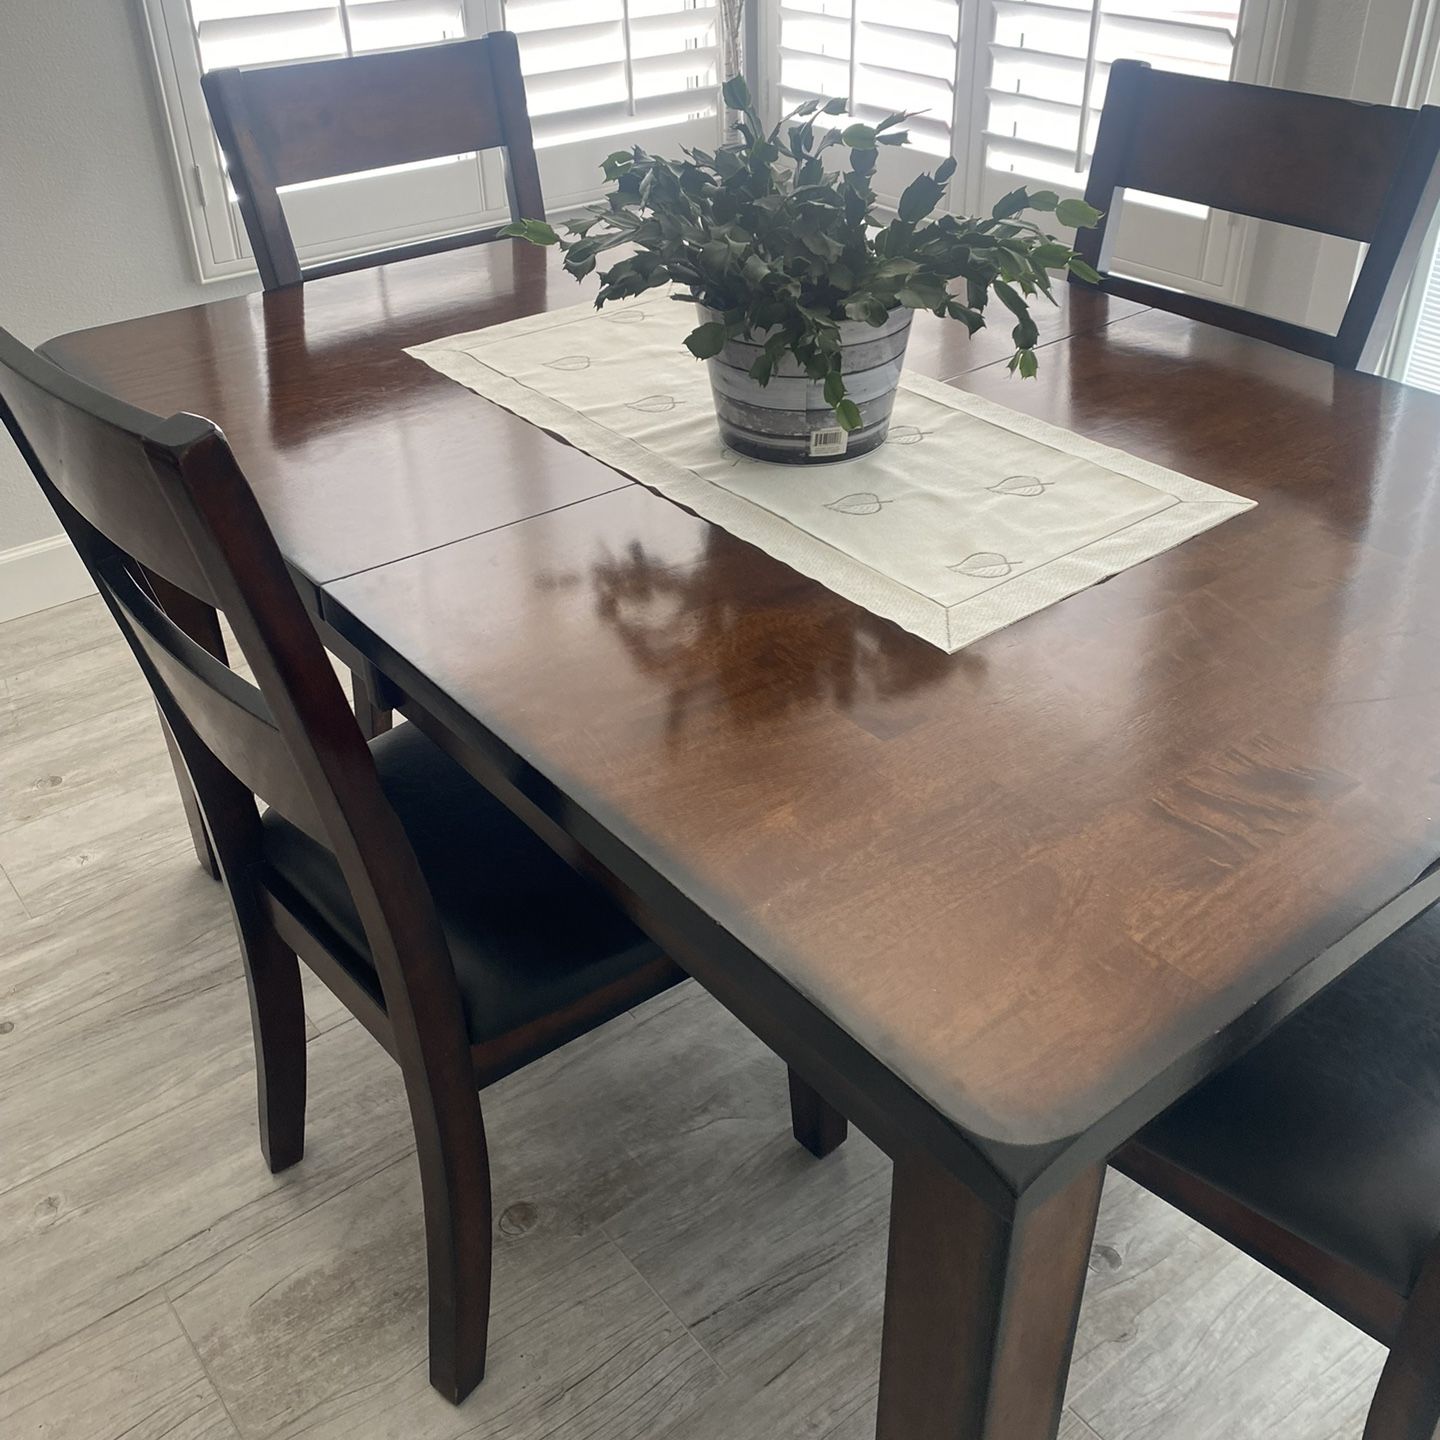 Kitchen Table Set W/6 Chairs For $200